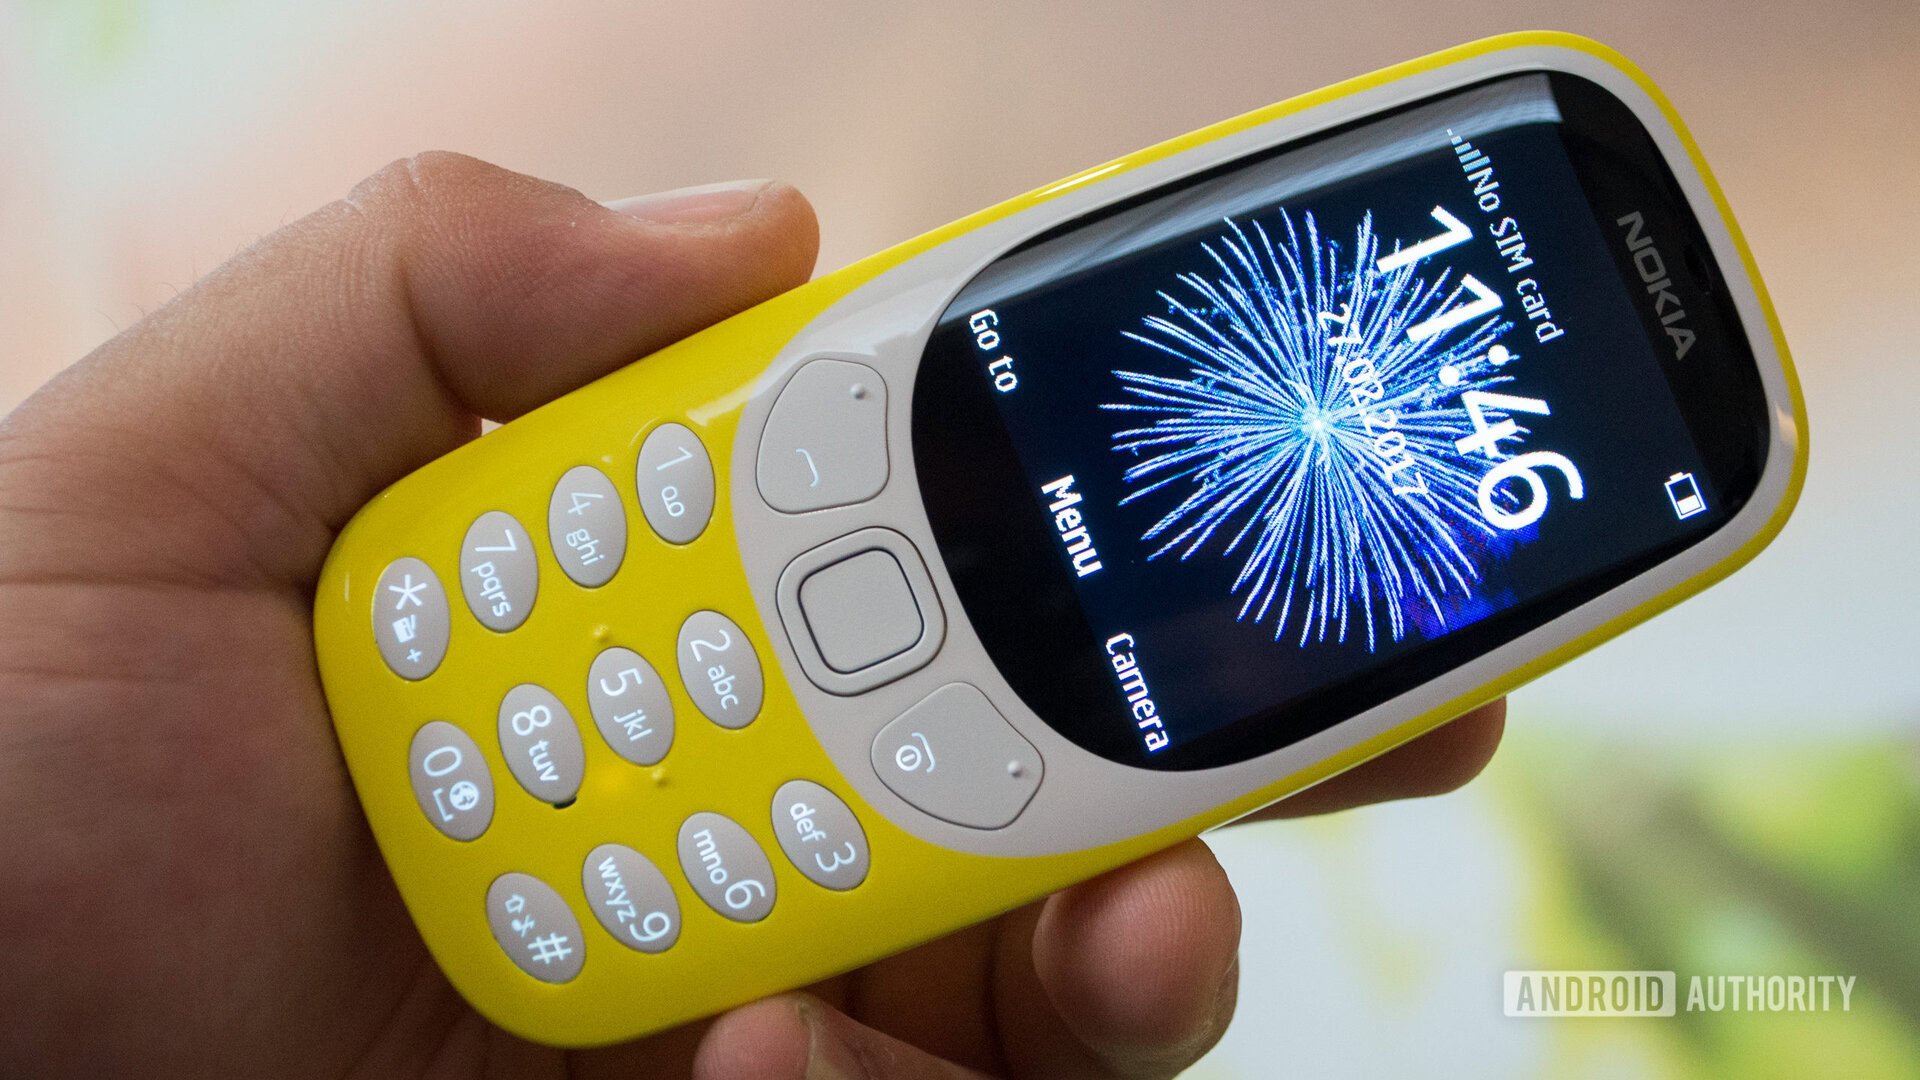 Why you don't need the Nokia 3310 - Android Authority